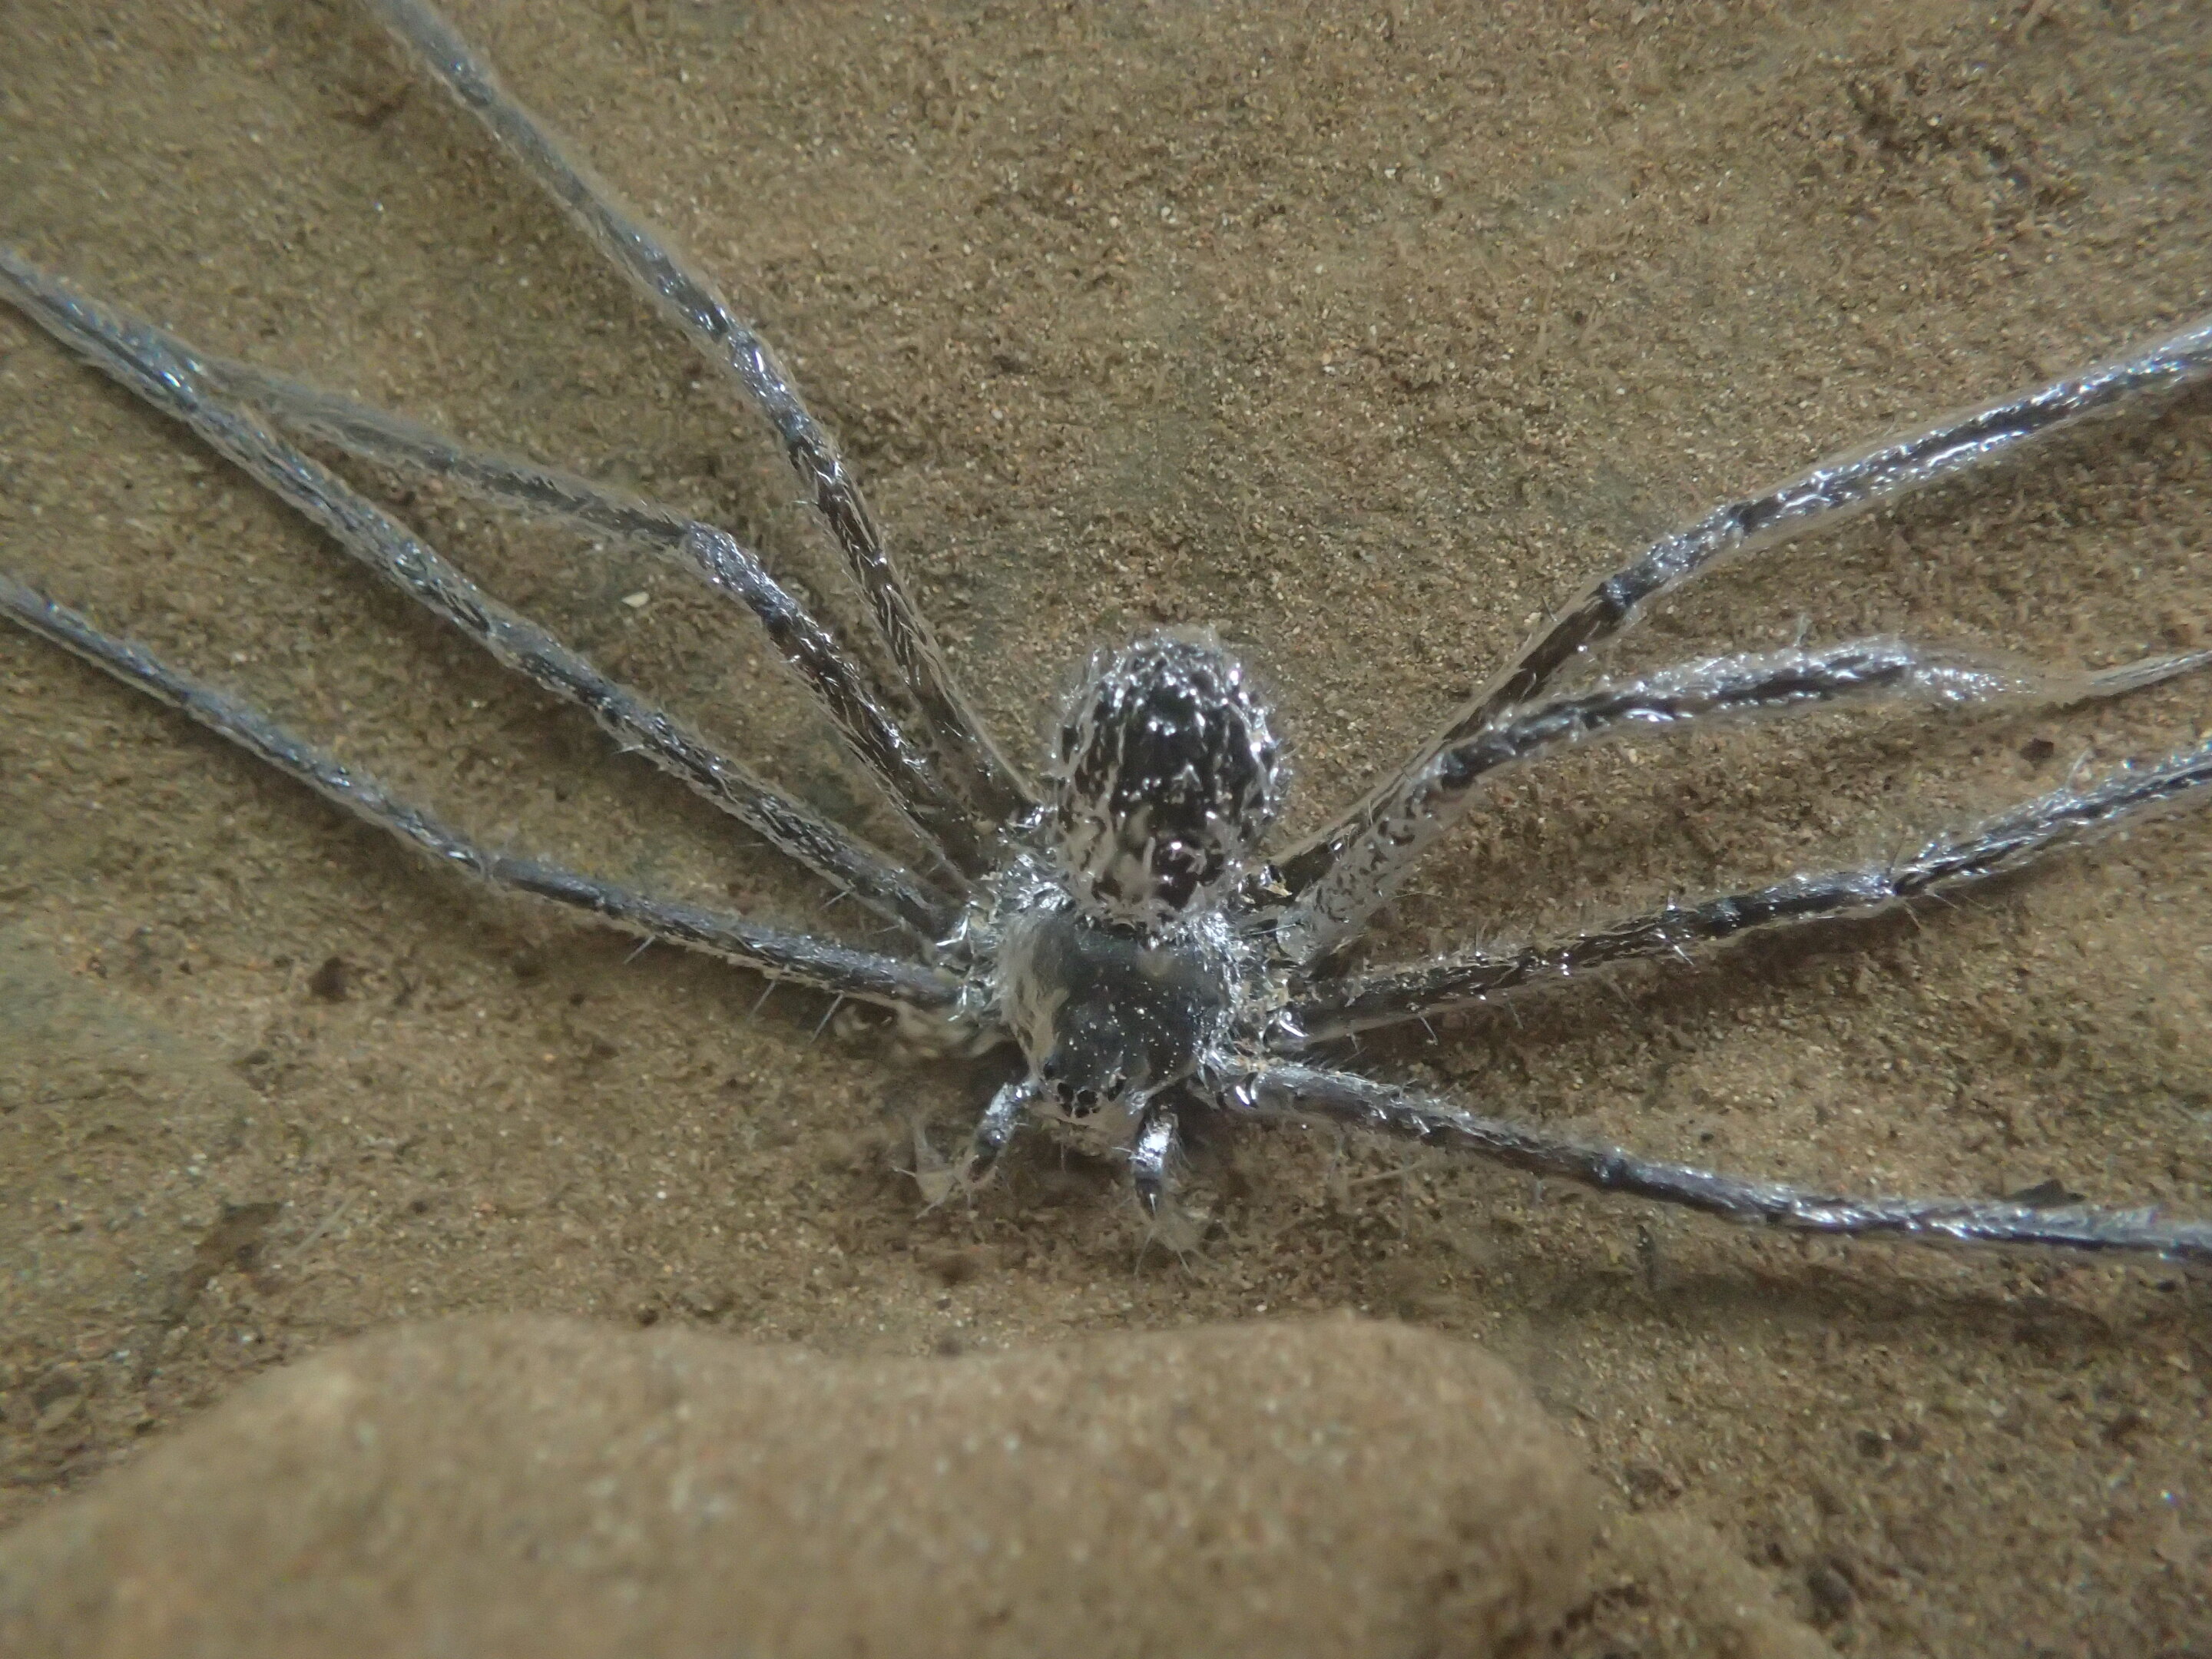 Tropical spider can hide underwater for 30 minutes